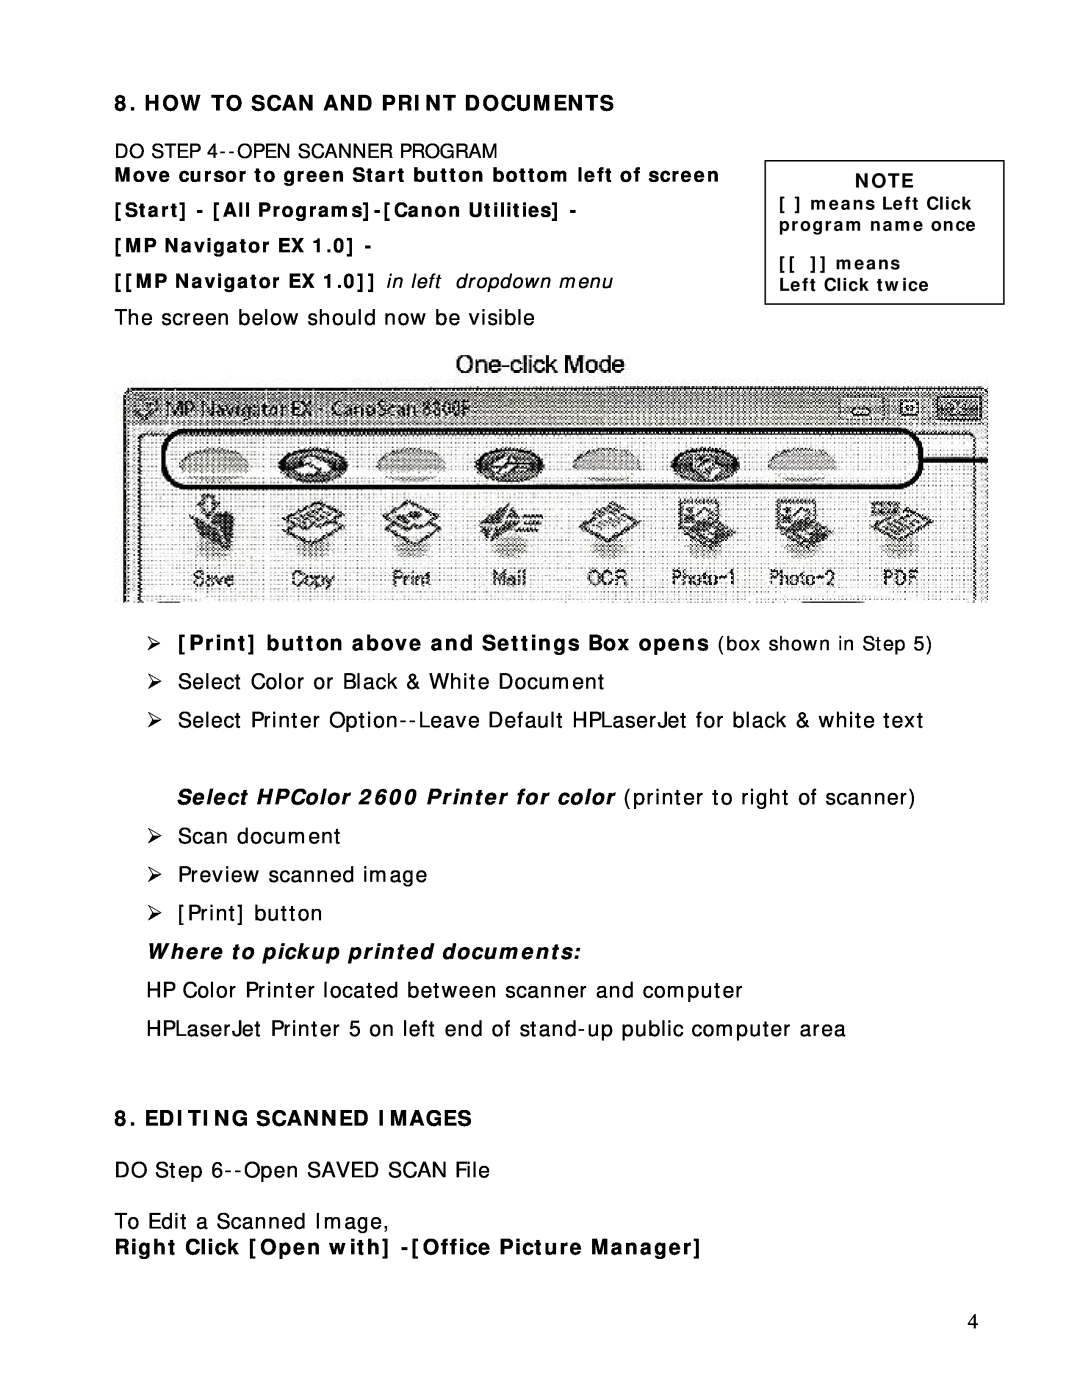 Canon 8800 brochure How To Scan And Print Documents,  Print button above and Settings Box opens box shown in Step 